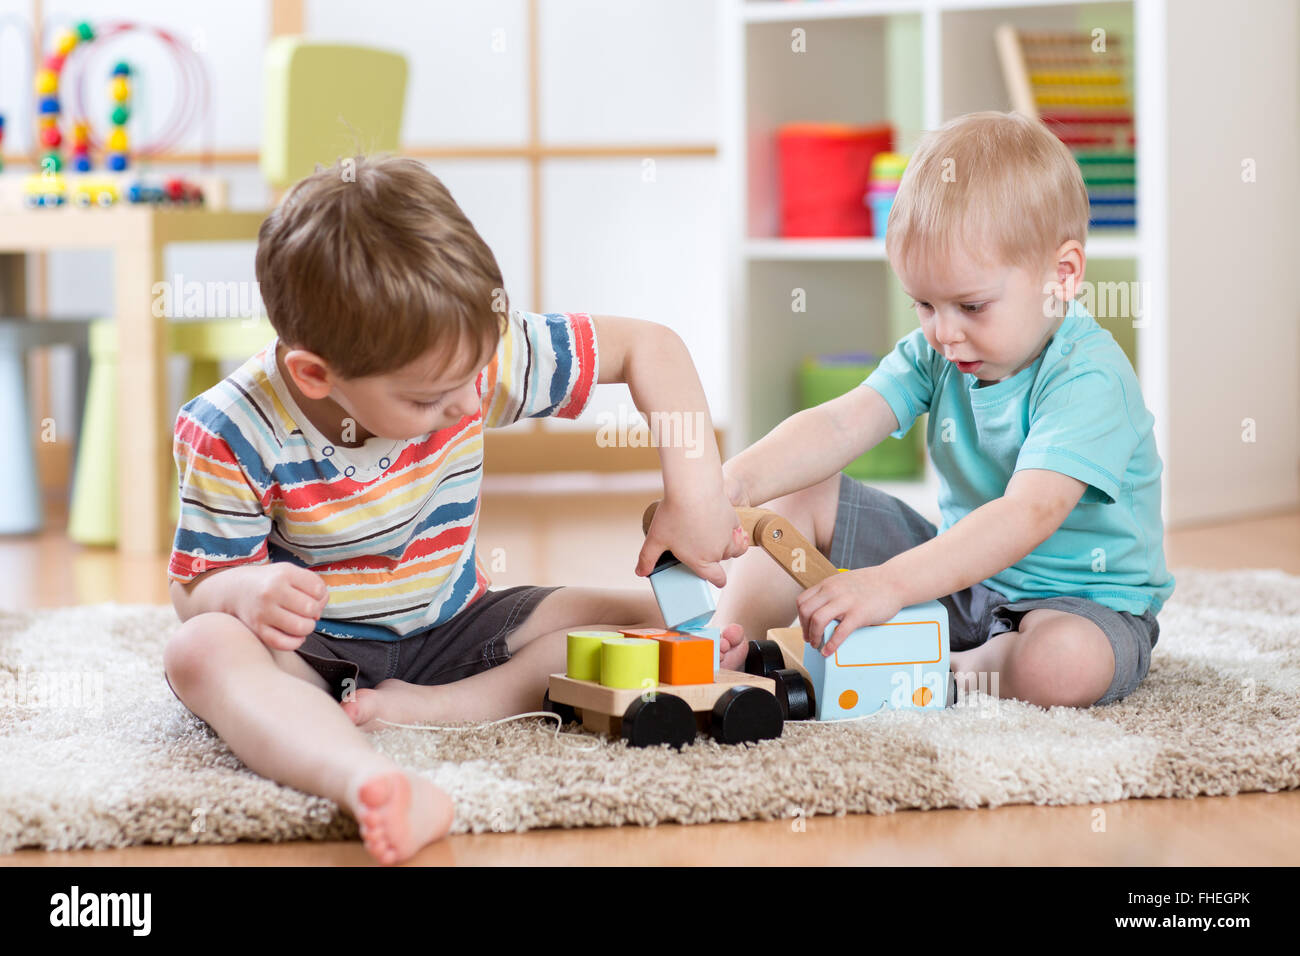 kids friends playing with crane car toy together Stock Photo